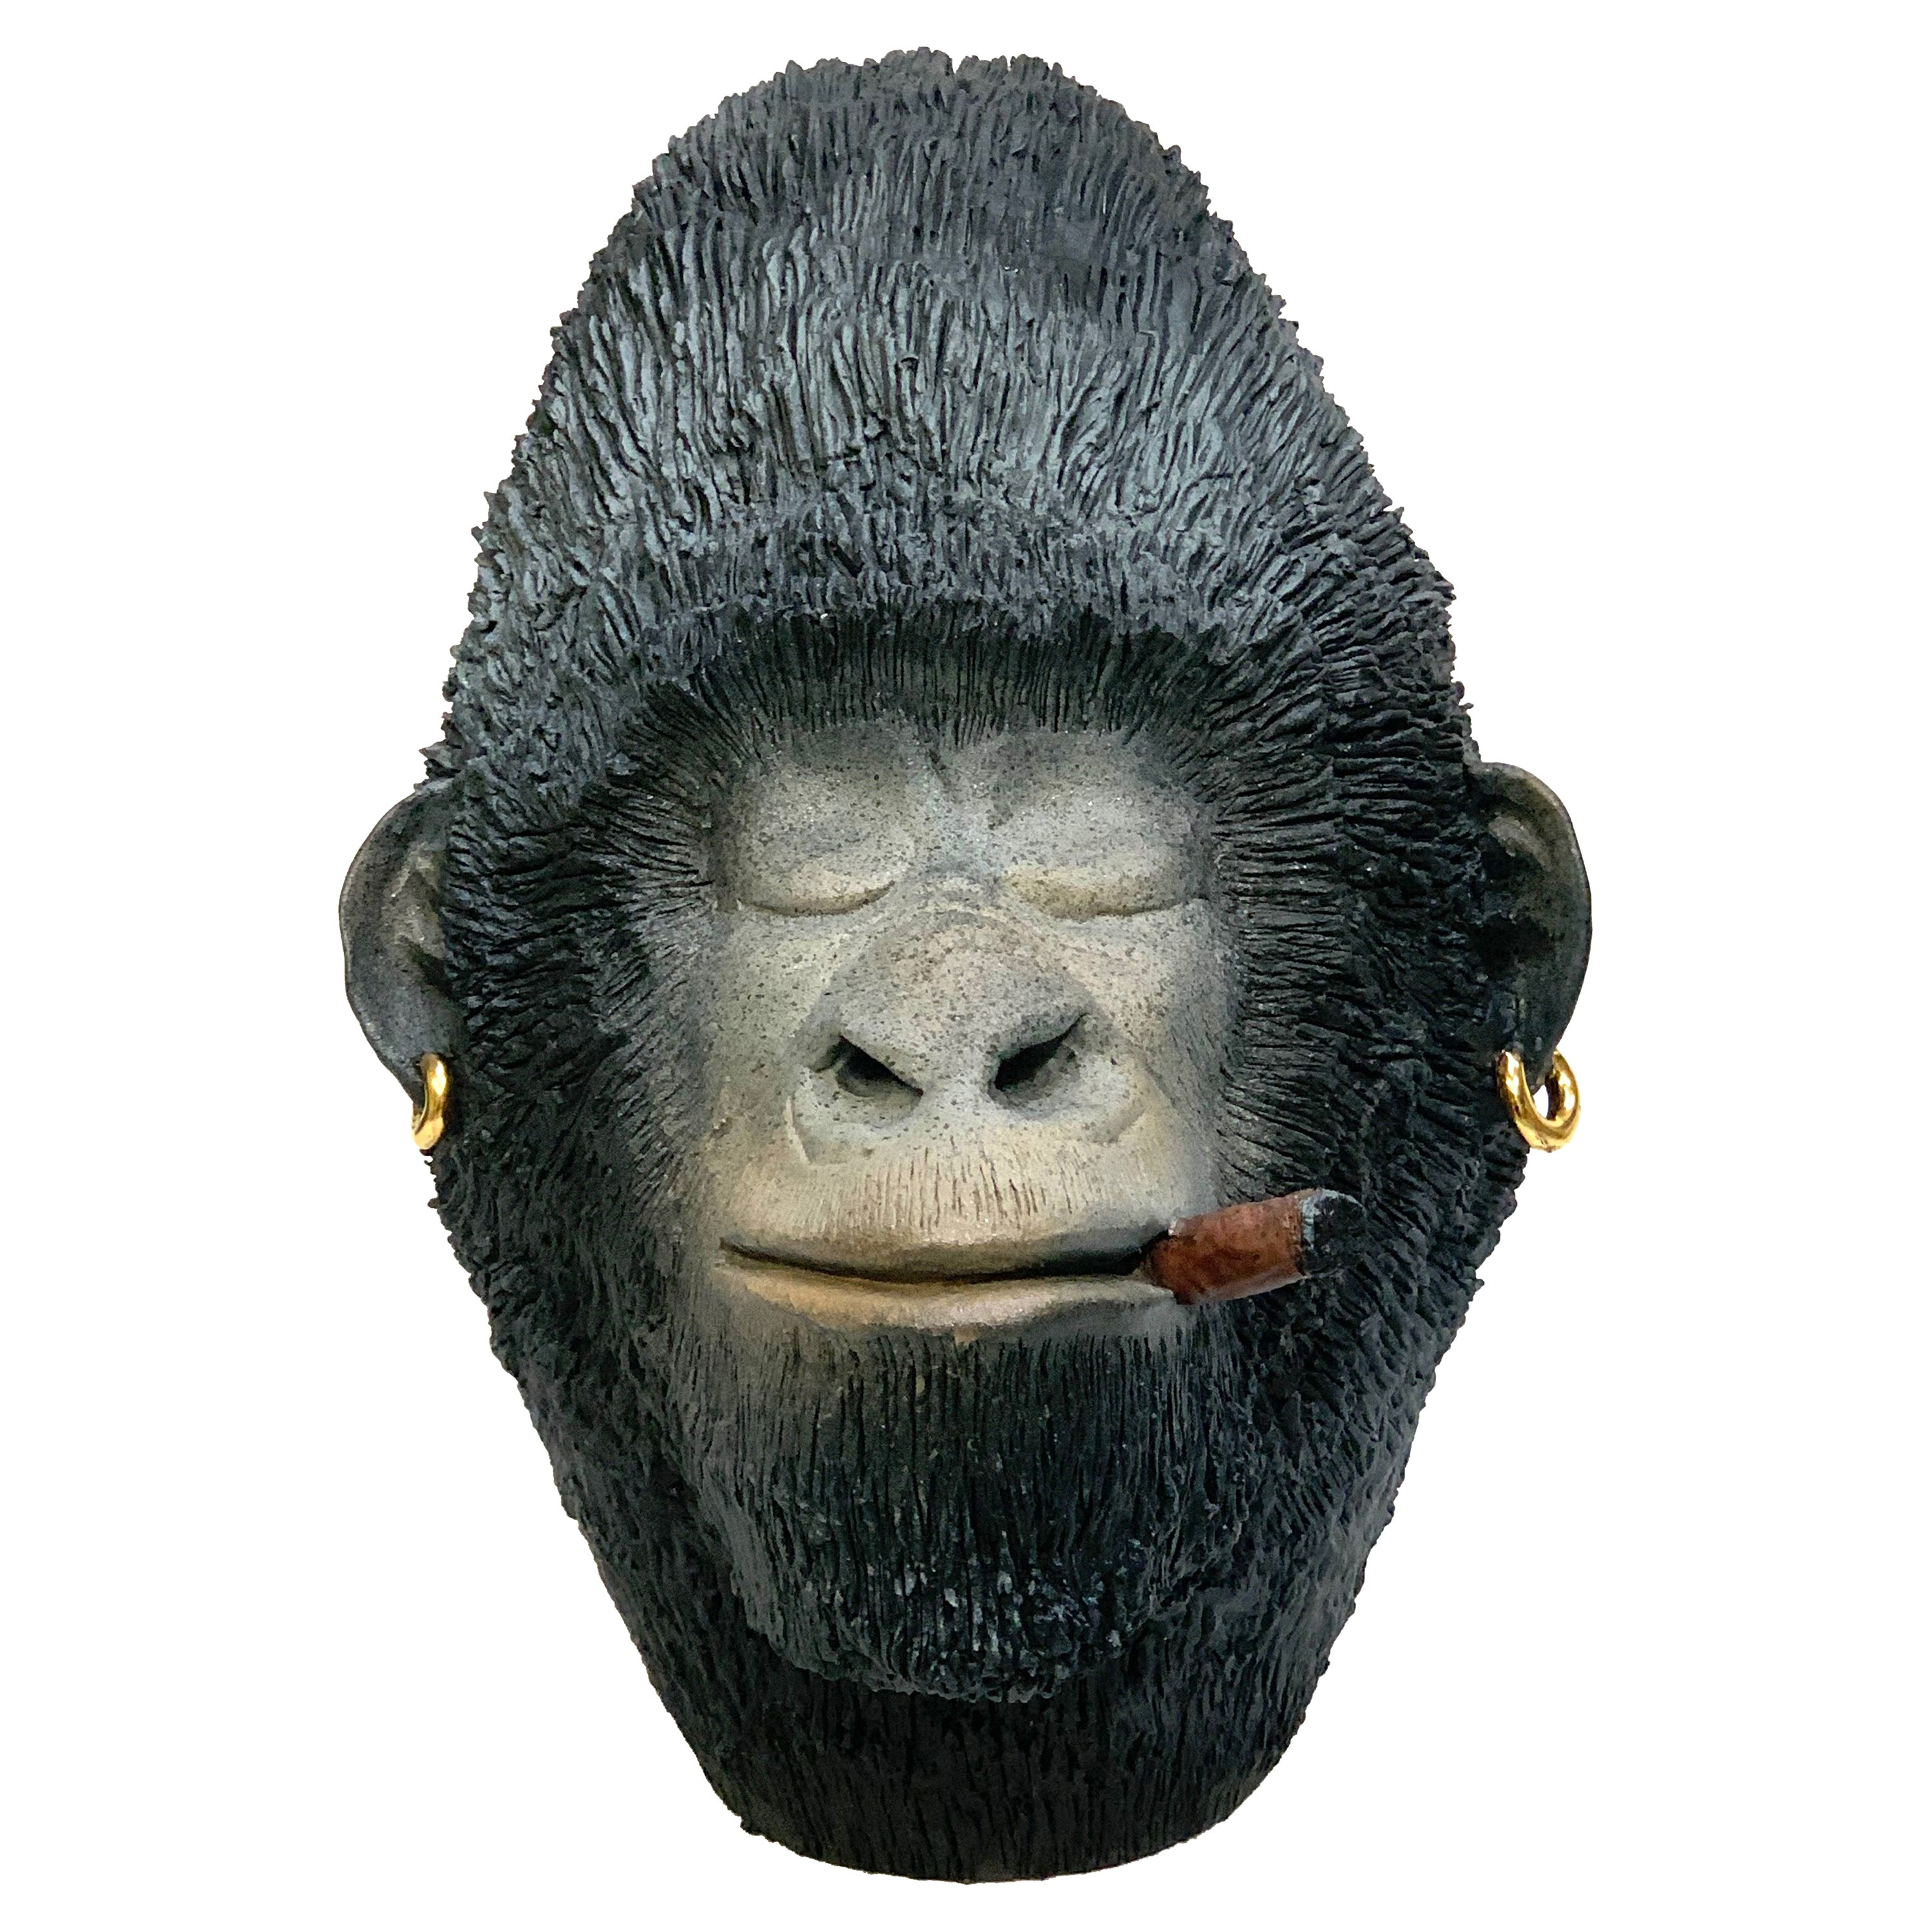 Cigar and Earrings Monkey, Ceramic Centerpiece, Handmade Design in Italy, 2021